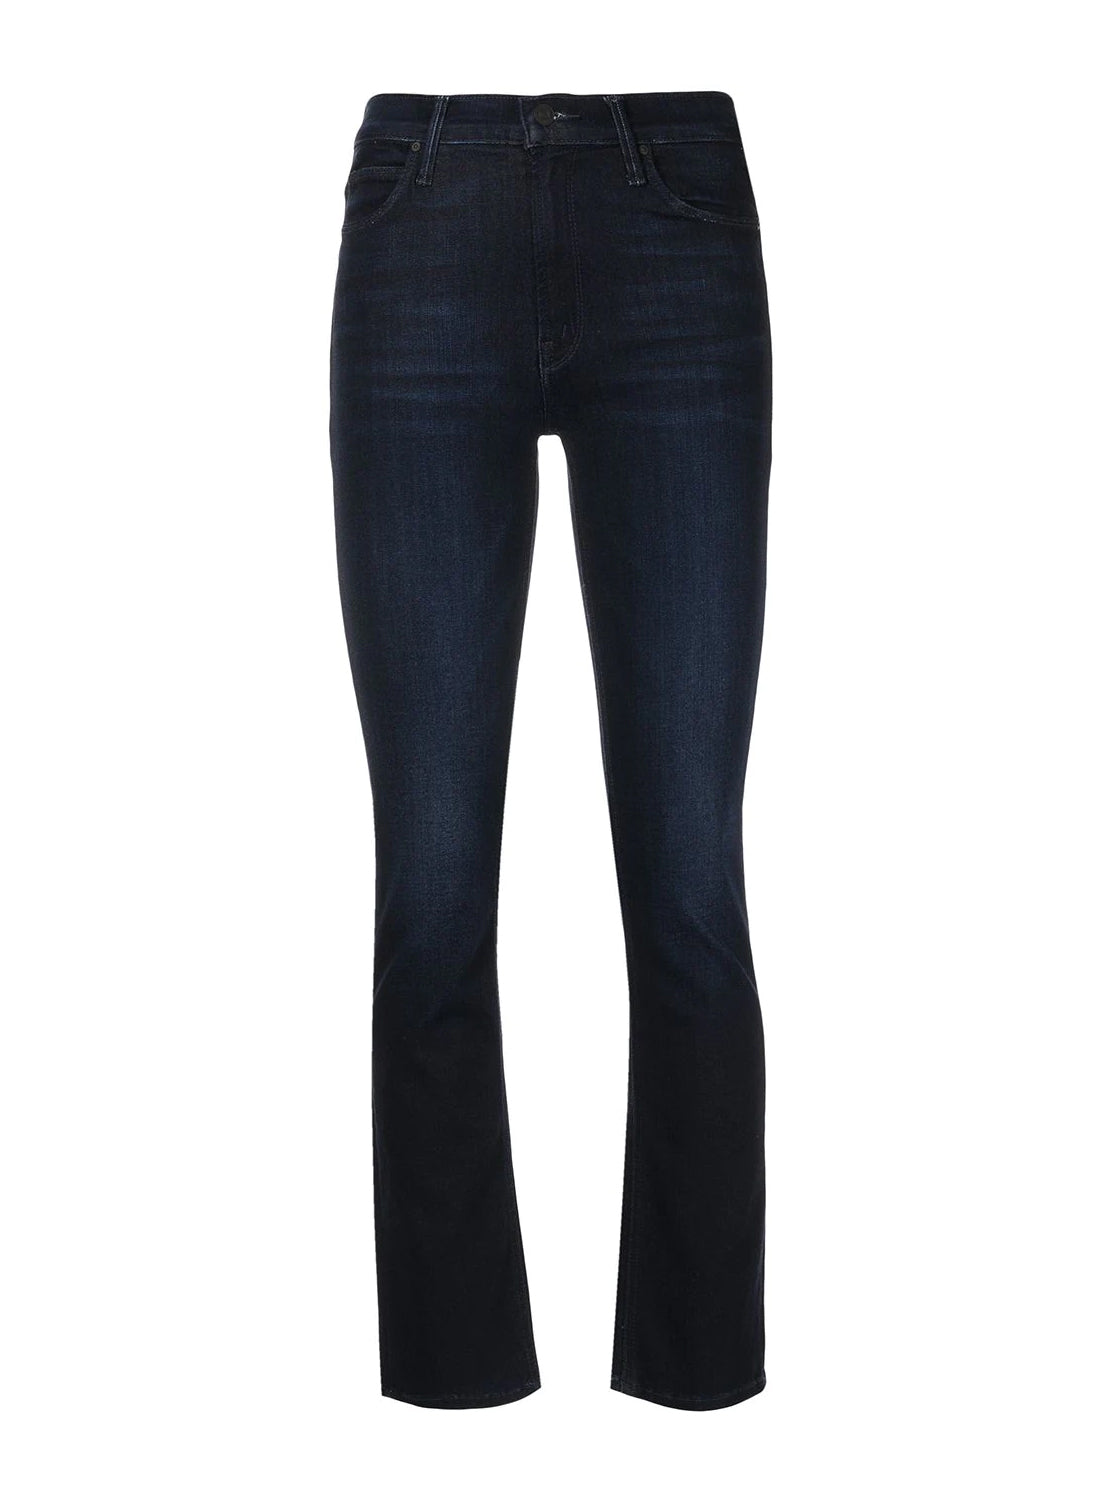 MOTHER DENIM: THE MID RISE DAZZLER ANKLE jeans, blue